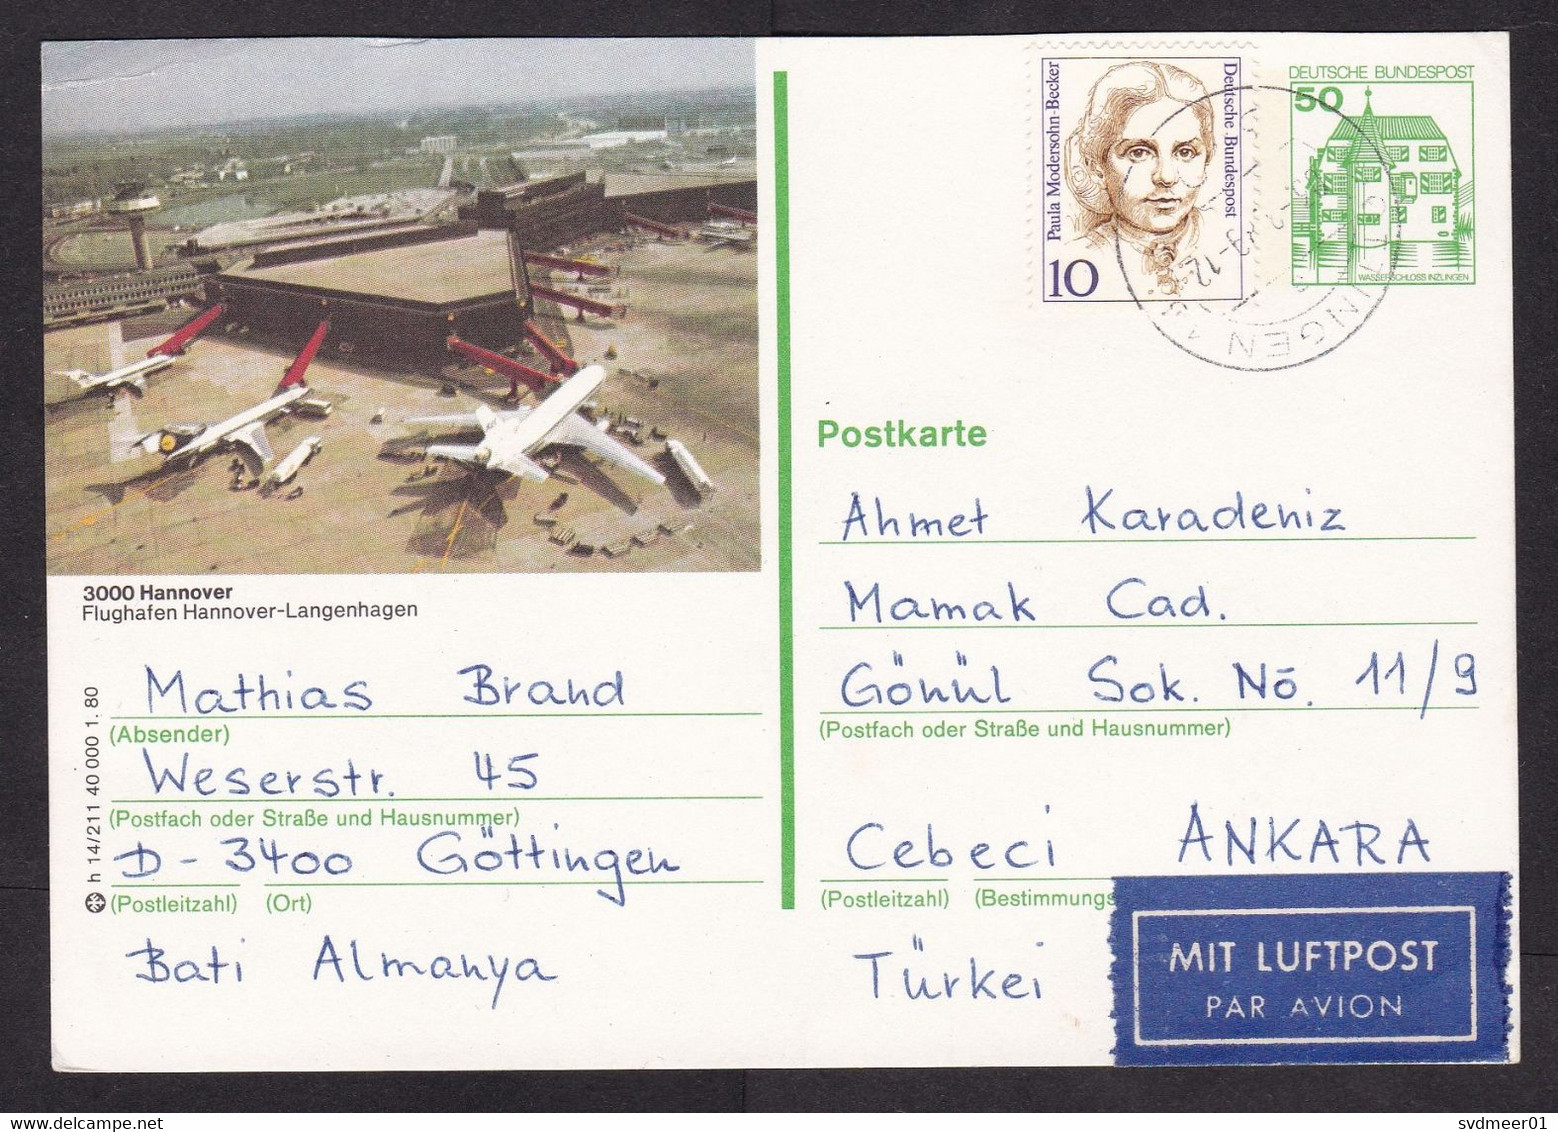 Germany: Stationery Postcard To Turkey 1989, Extra Stamp, Airport Hannover, Airplane Aviation, Air Label (traces Of Use) - Covers & Documents